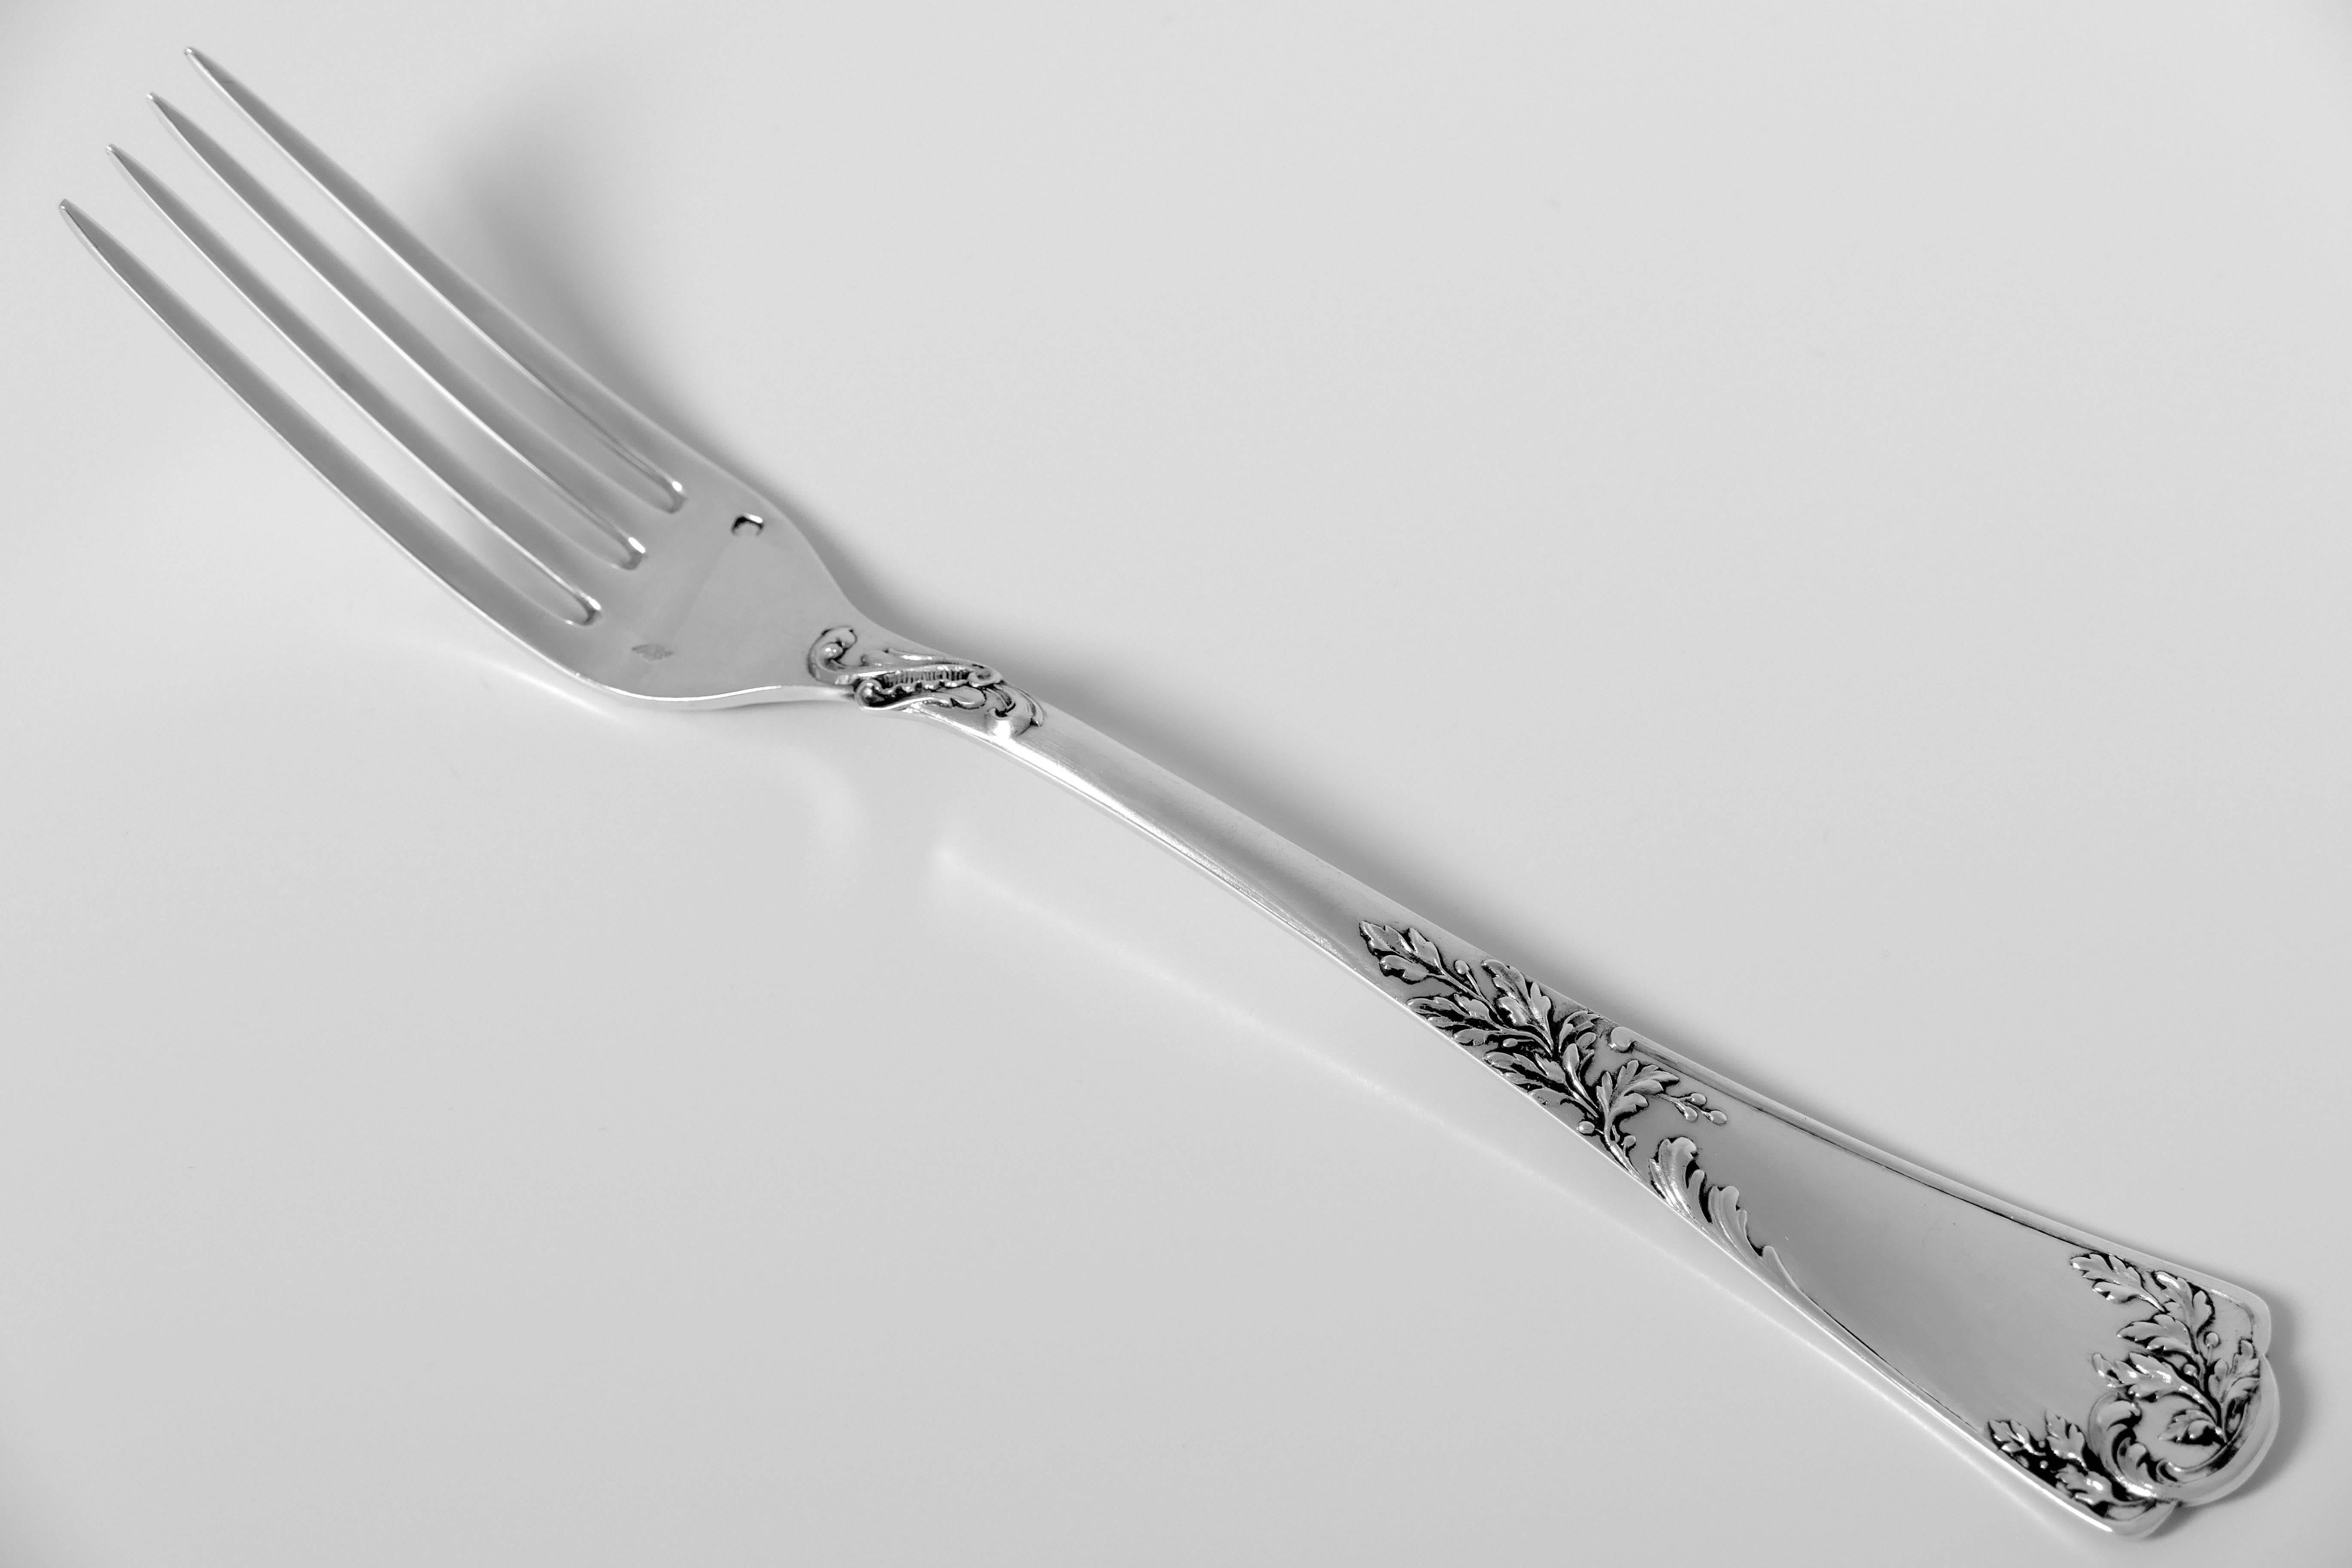 Handles have fantastic decoration in the Rococo style. Model called: Louis XV, Foliate, in the catalog of the Maison Puiforcat. 

Head of Minerve 1st titre on the handles for 950/1000 French sterling silver guarantee.

Prestigious silversmith:
Emile